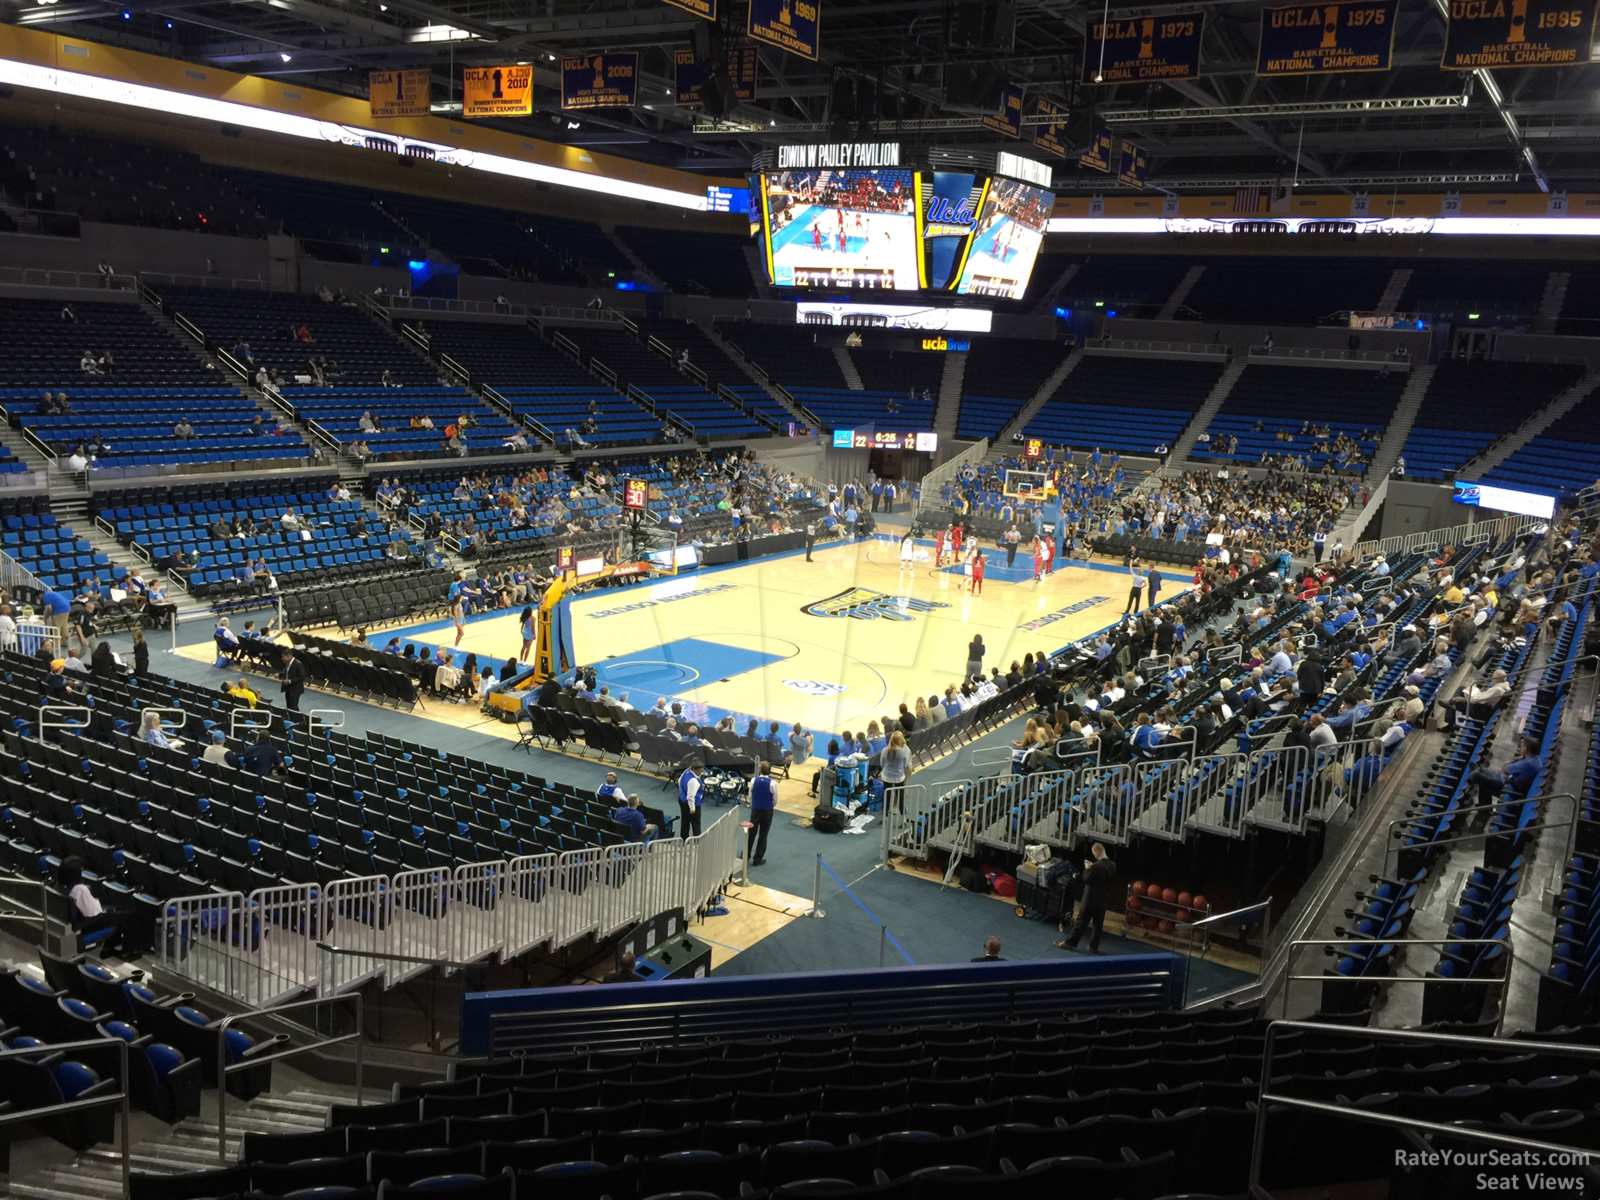 section 106, row 13 seat view  - pauley pavilion